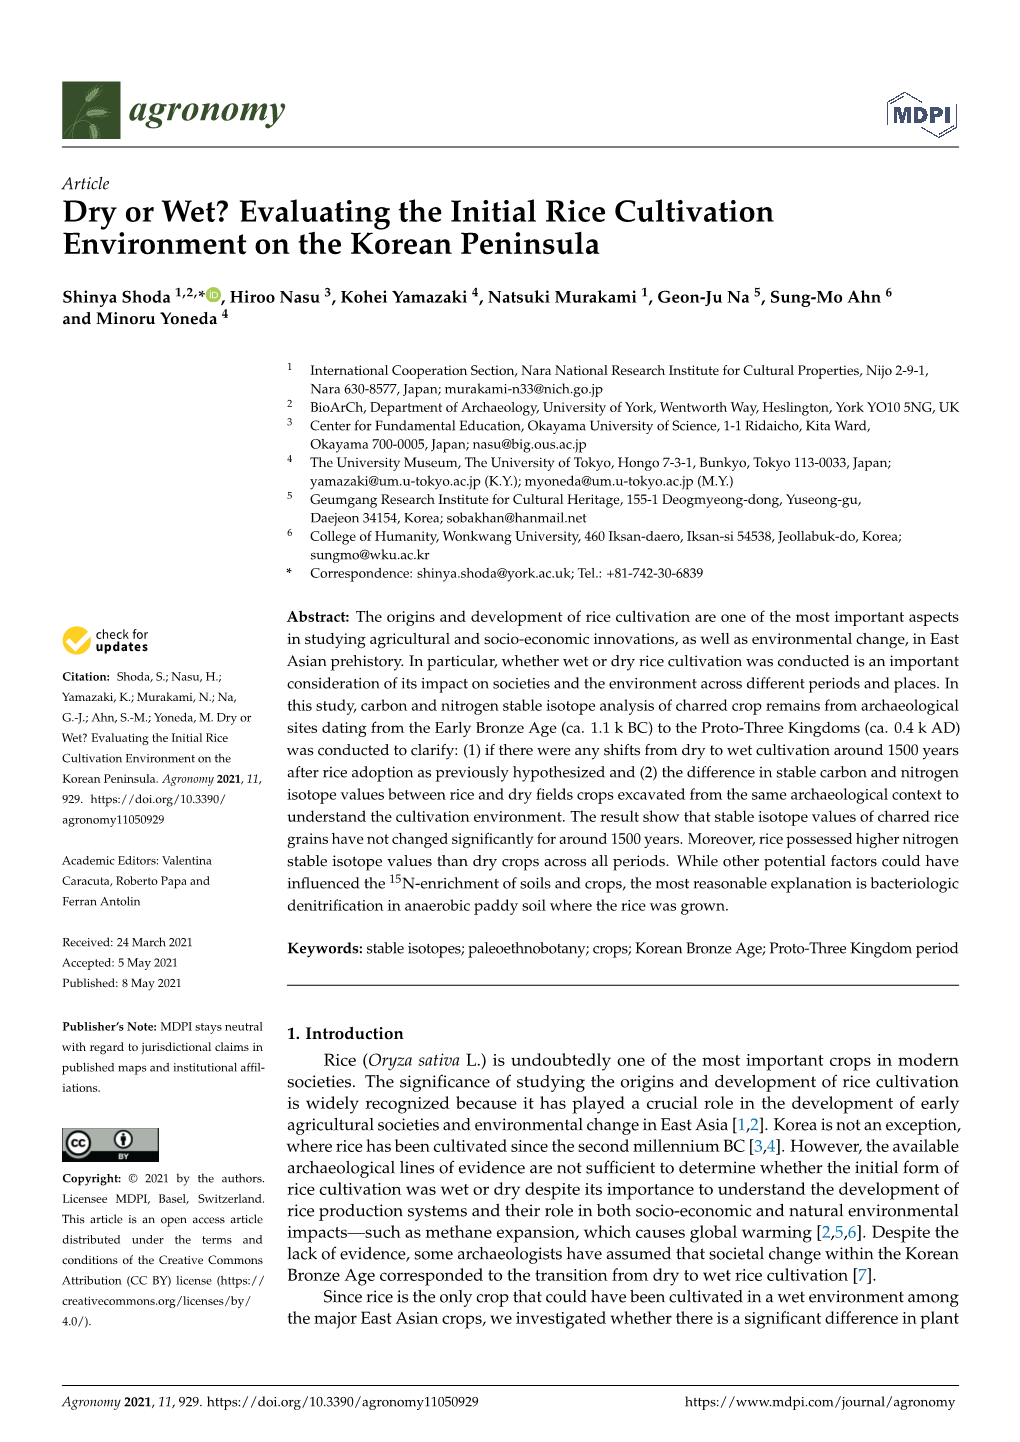 Evaluating the Initial Rice Cultivation Environment on the Korean Peninsula